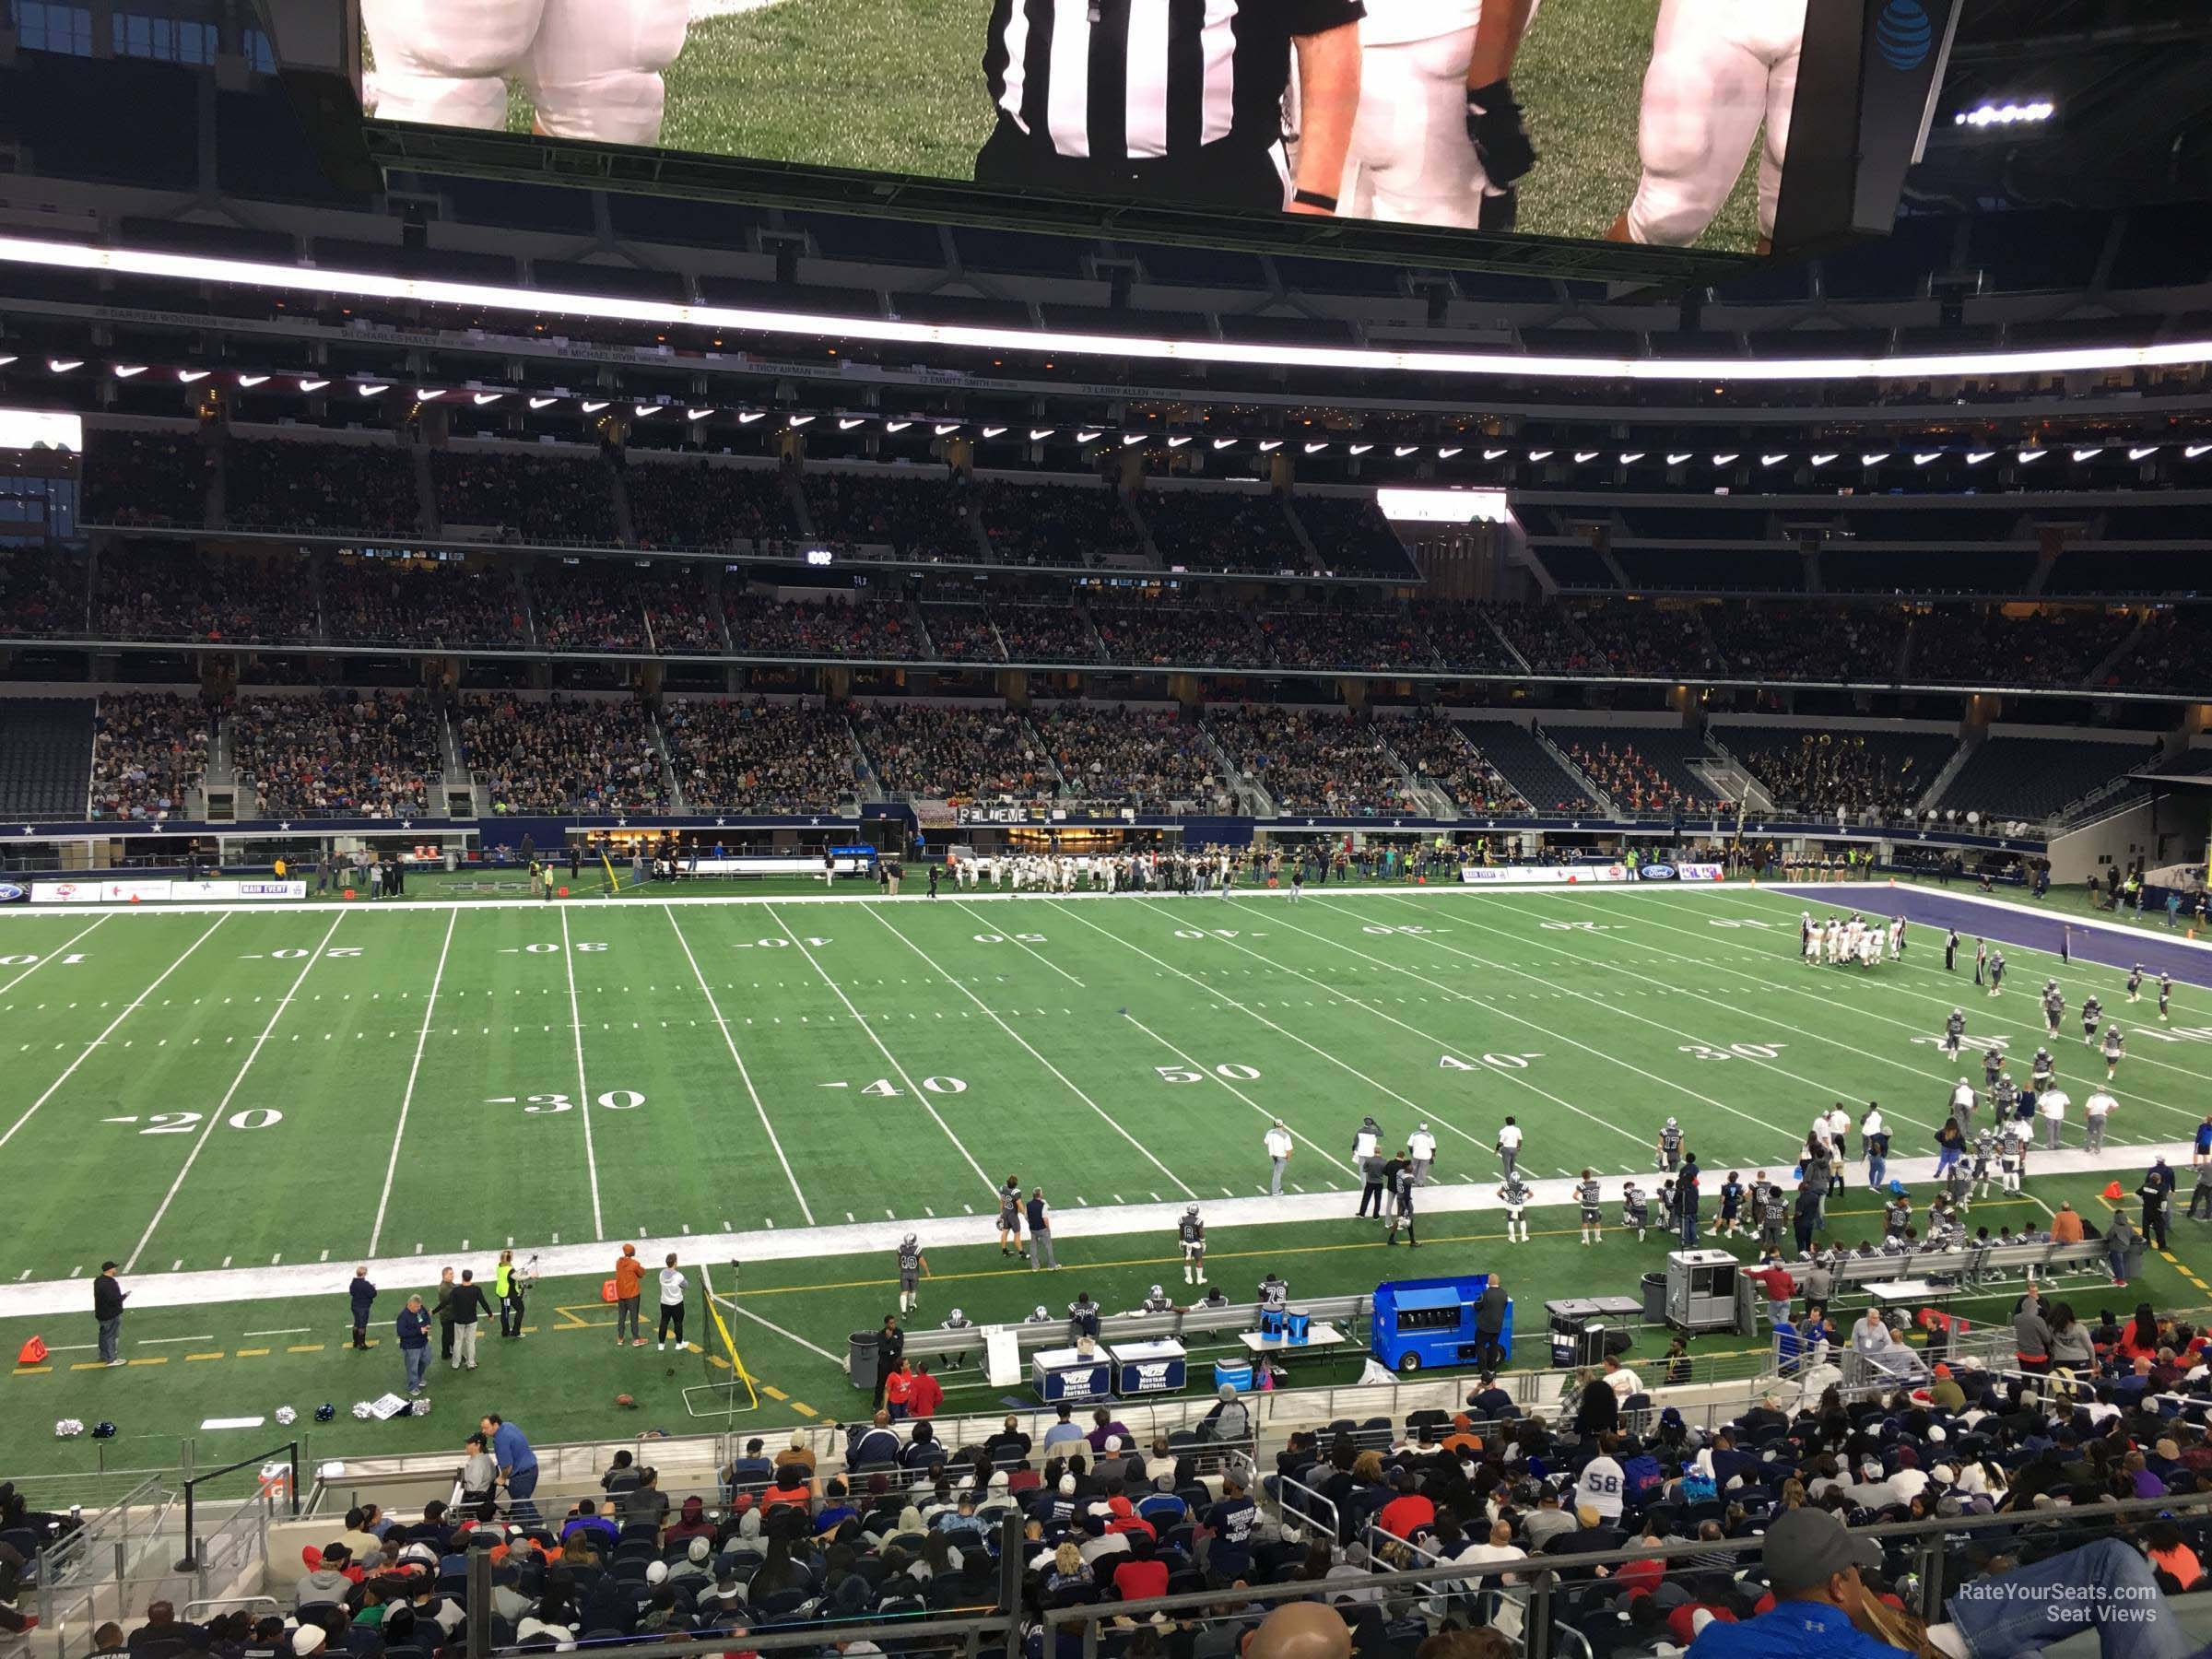 section c211, row 4 seat view  for football - at&t stadium (cowboys stadium)